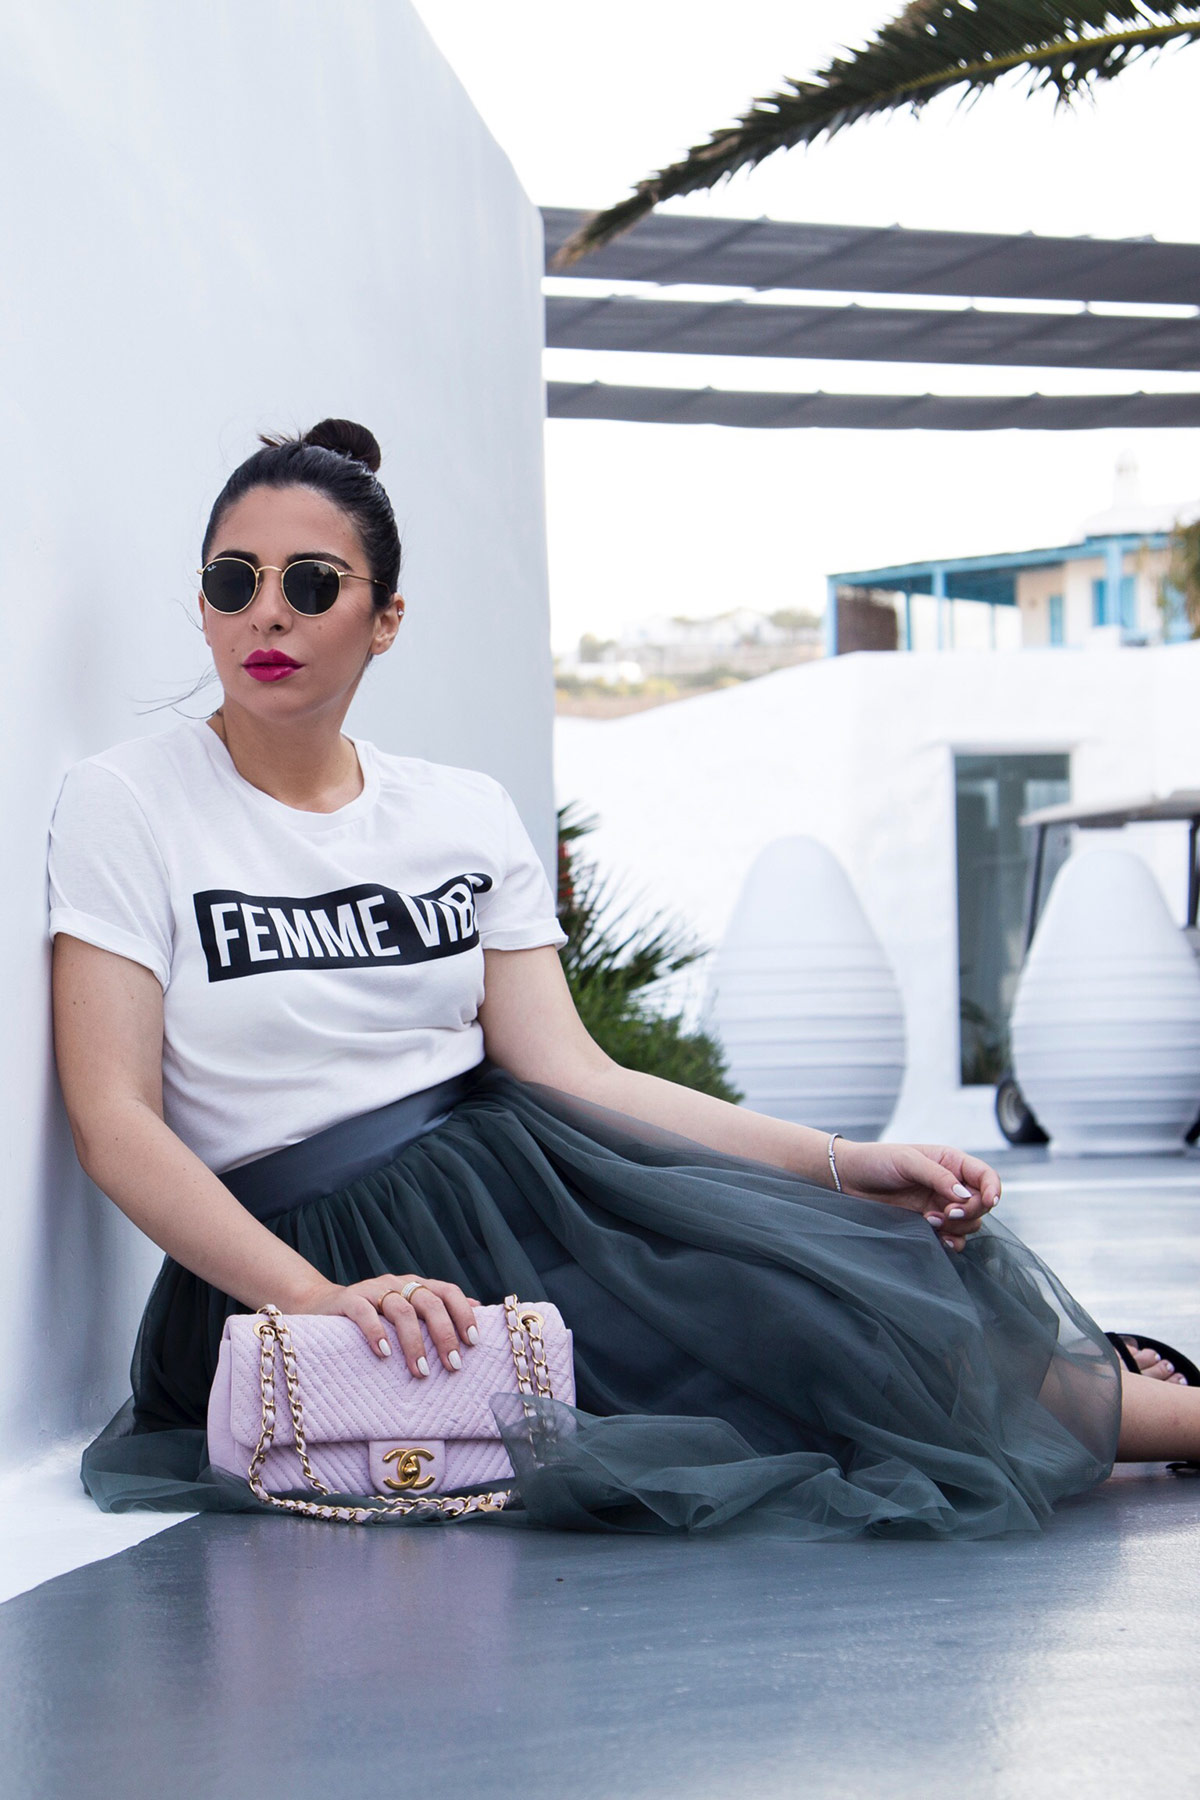 Tulle Skirt & How To Wear It by Stella Asteria | Fashion & Lifestyle Blogger